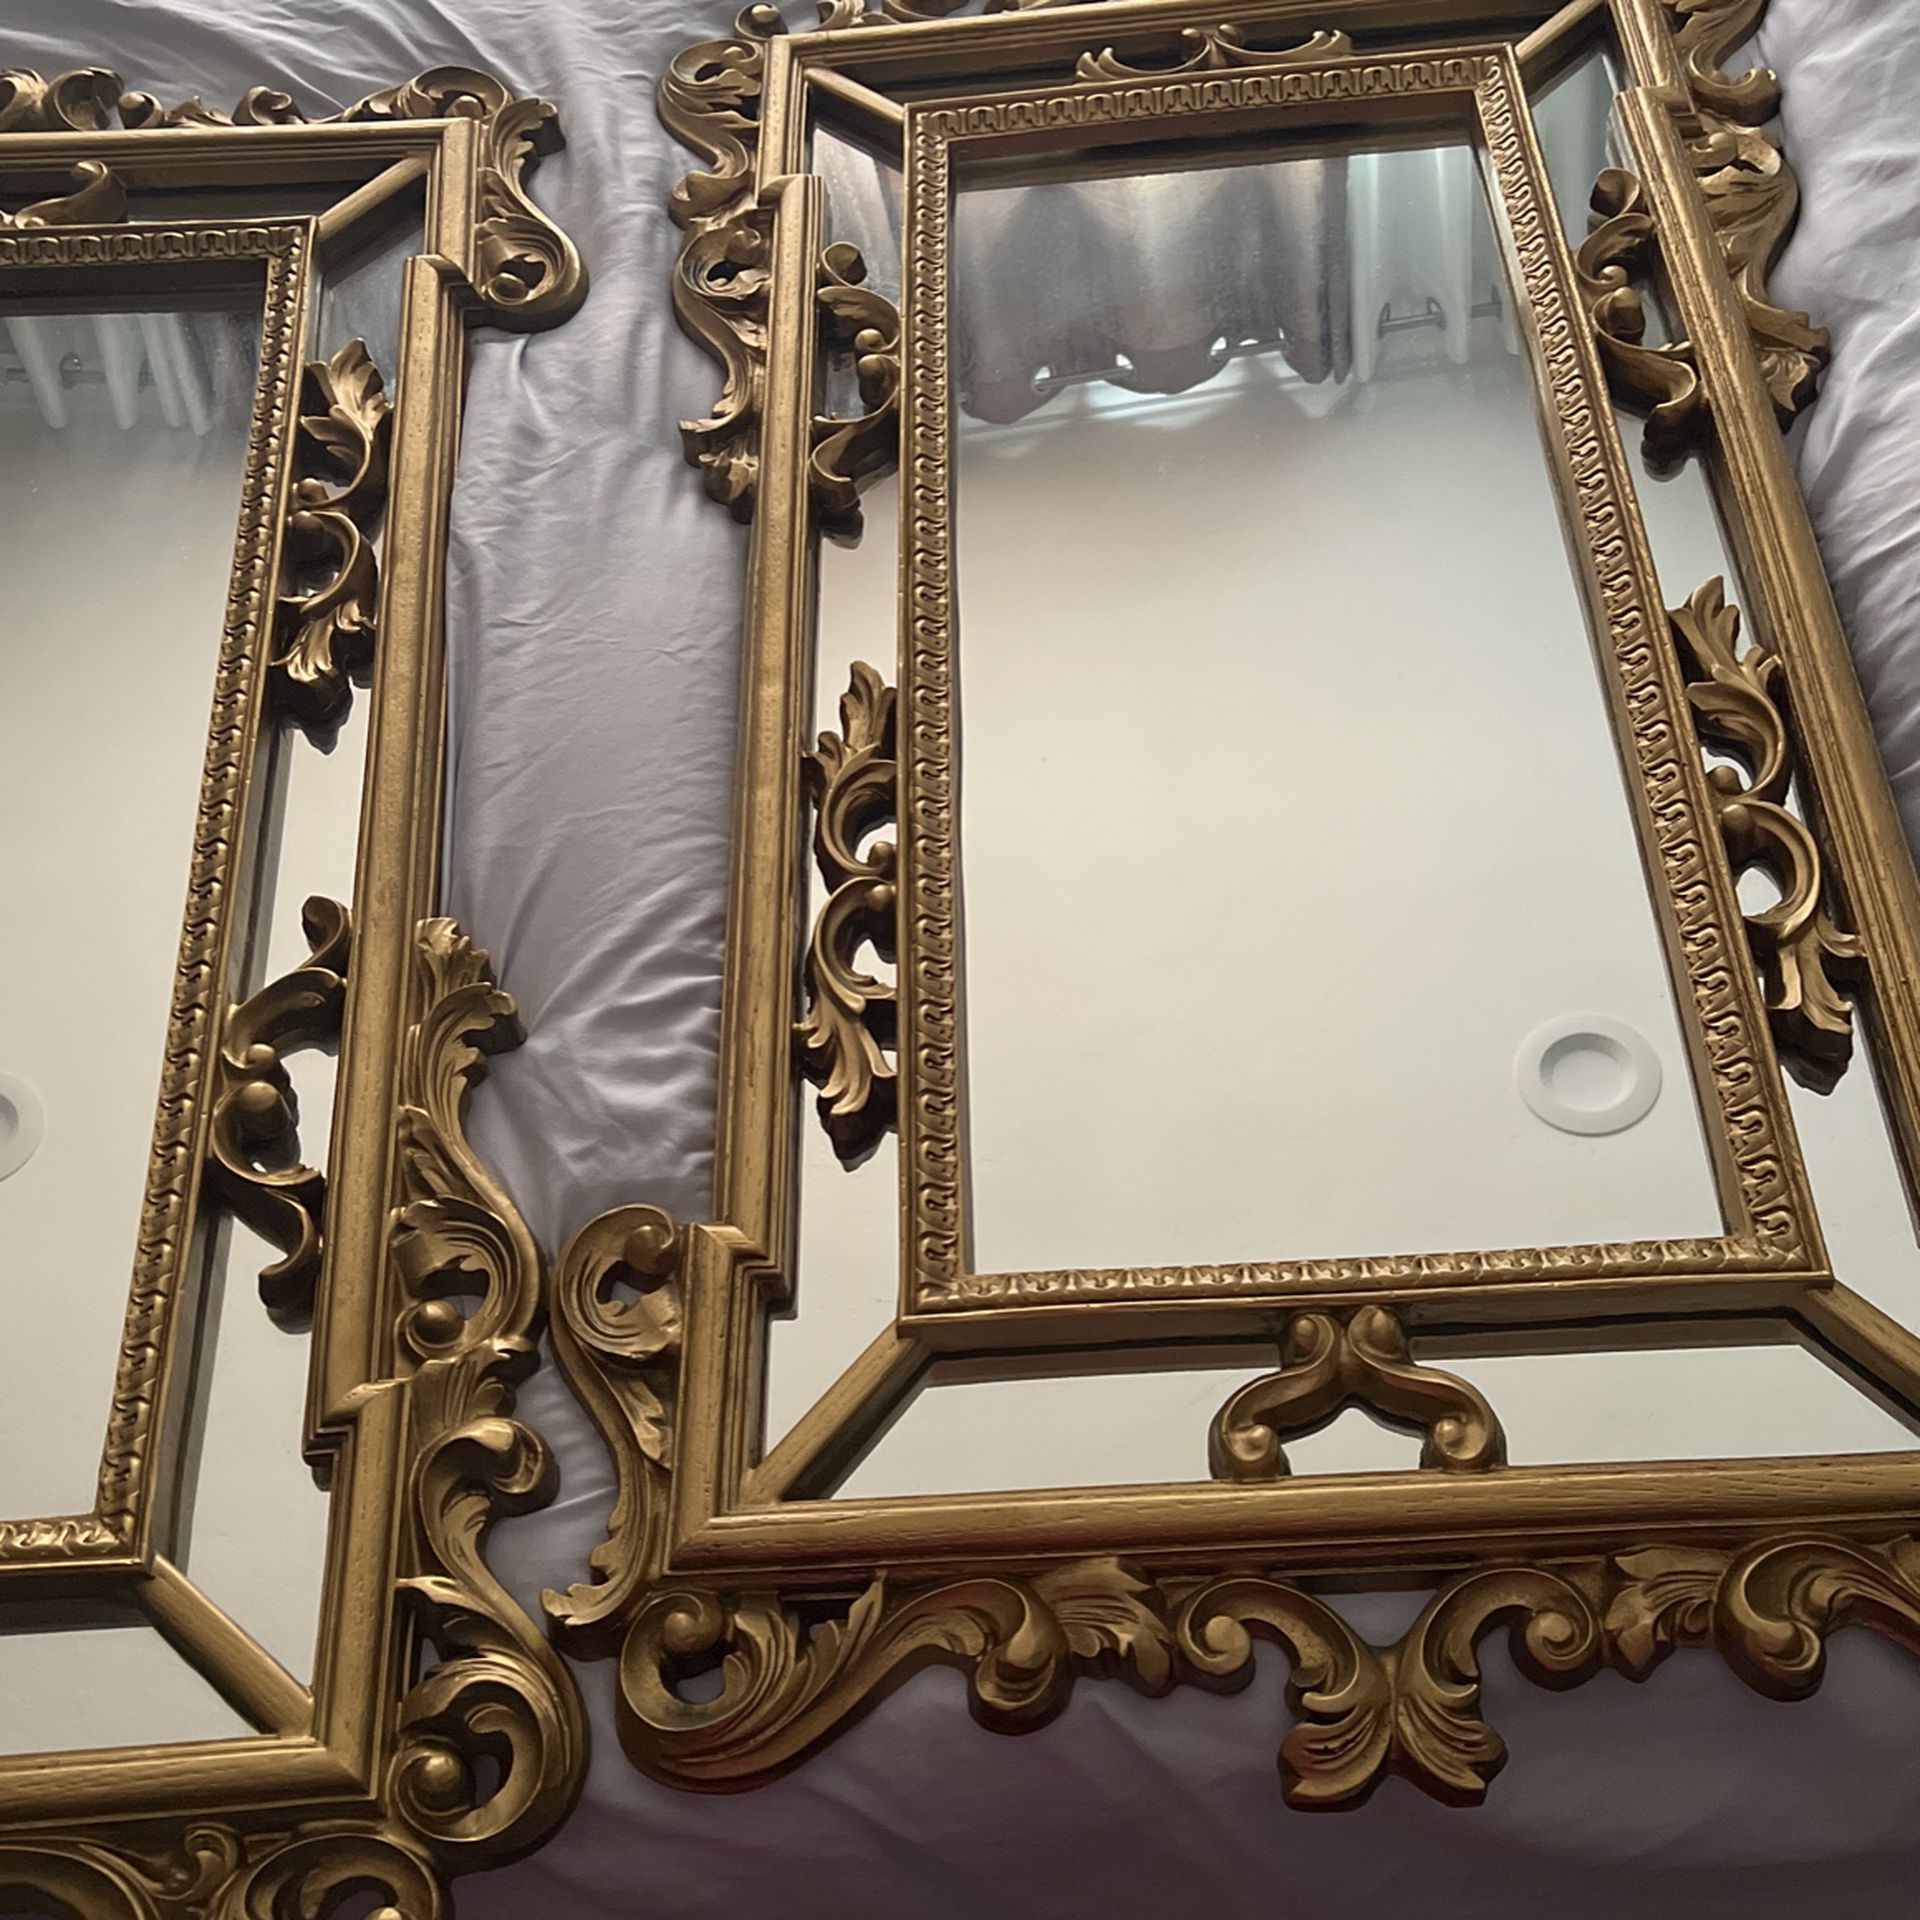 Two Beautiful Mirrors for Sale in Chula Vista, CA - OfferUp